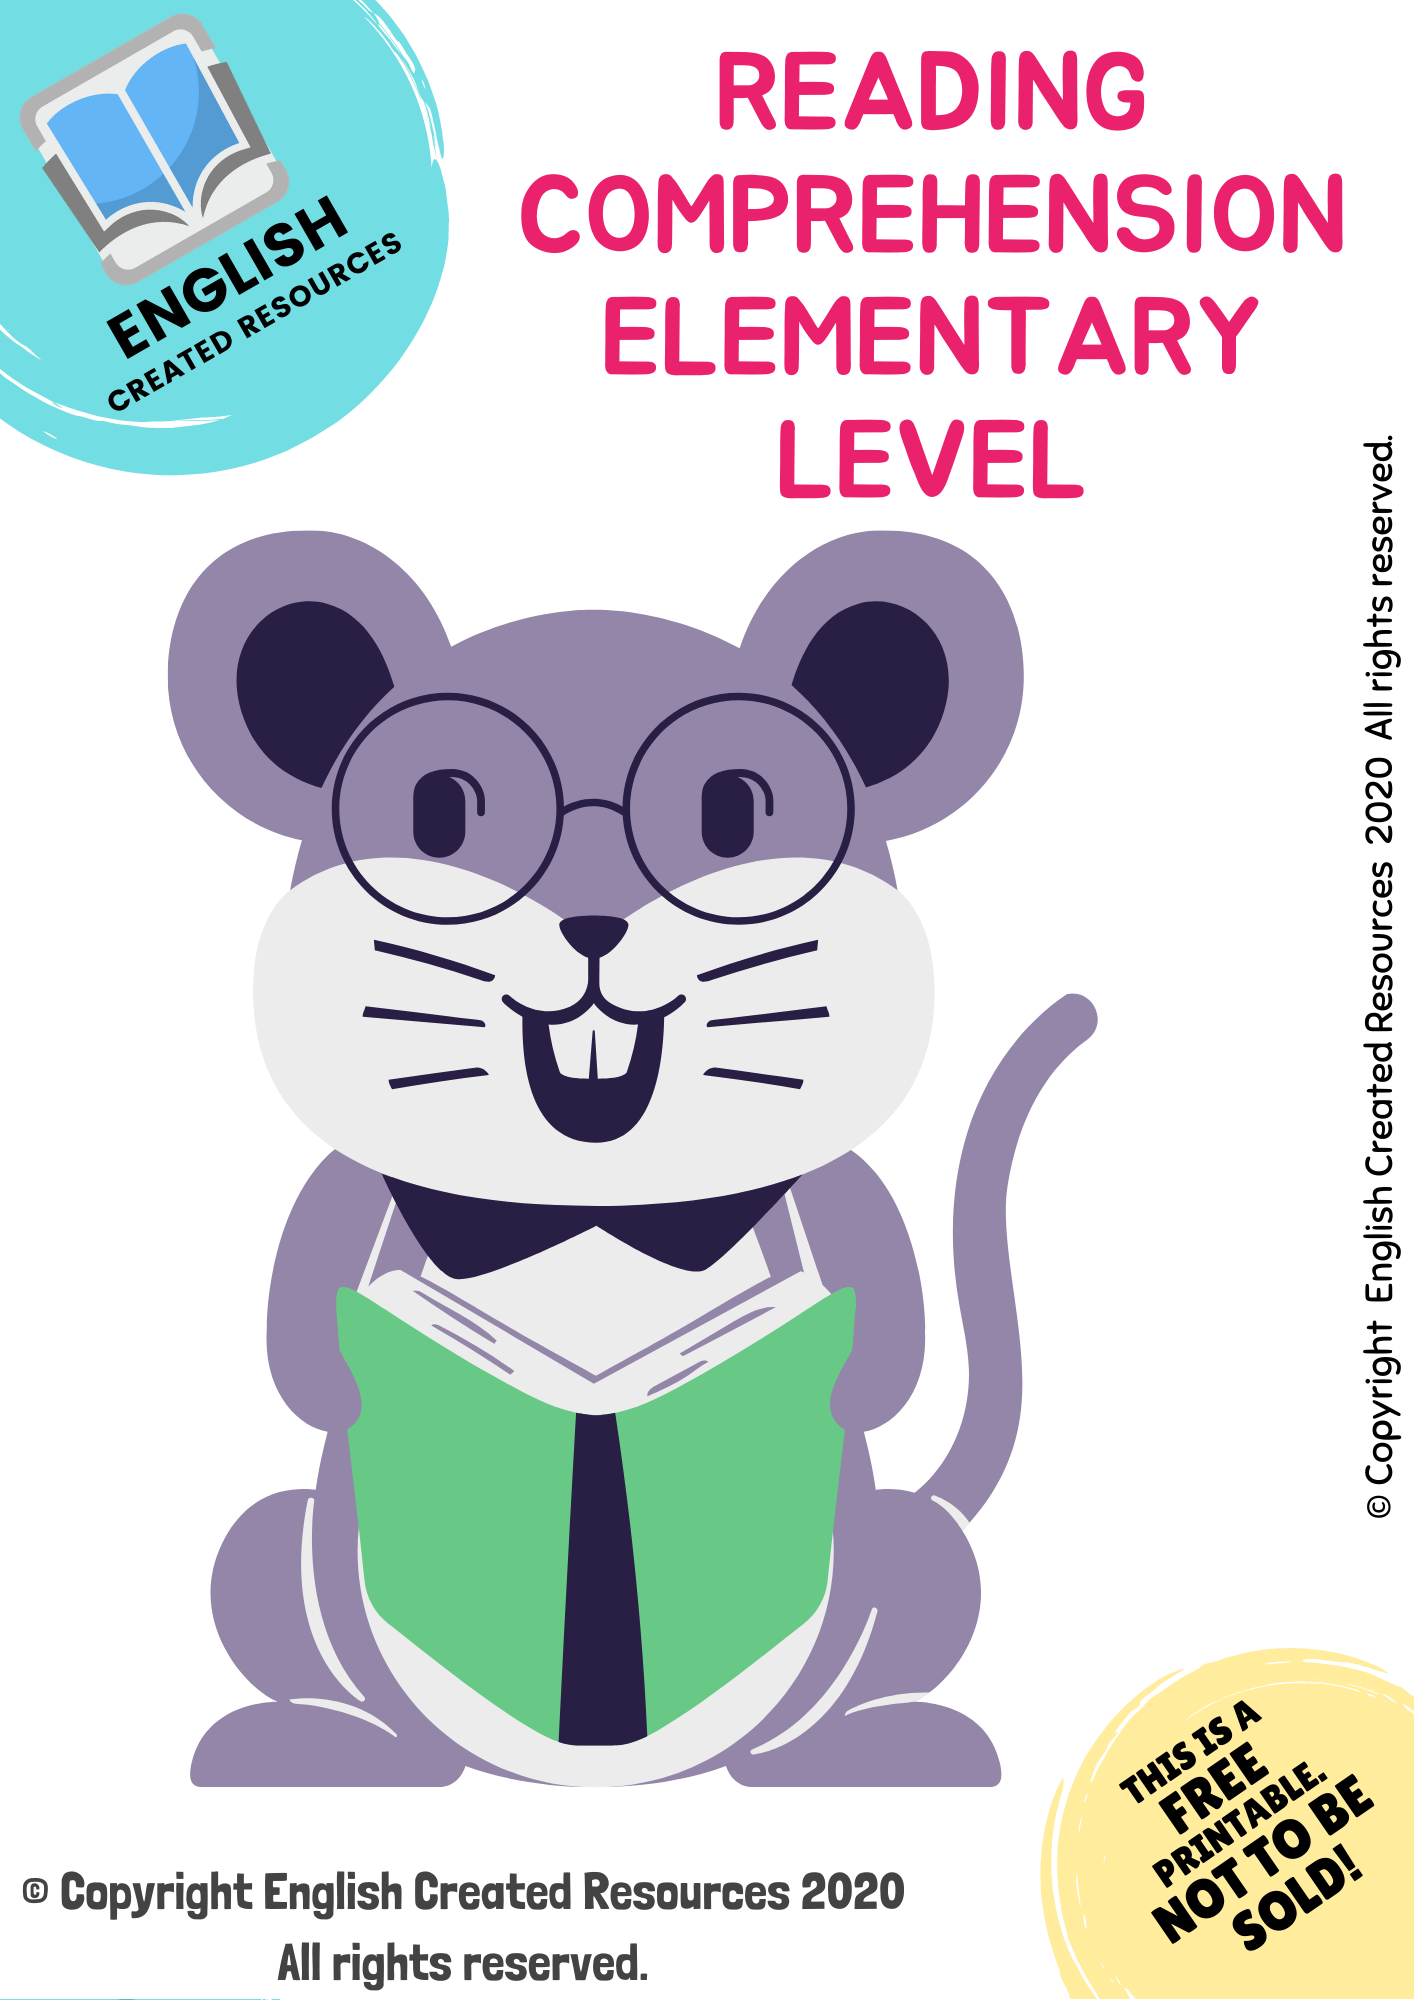 Elementary comprehensive. Reading Comprehension Elementary. English created resources reading.